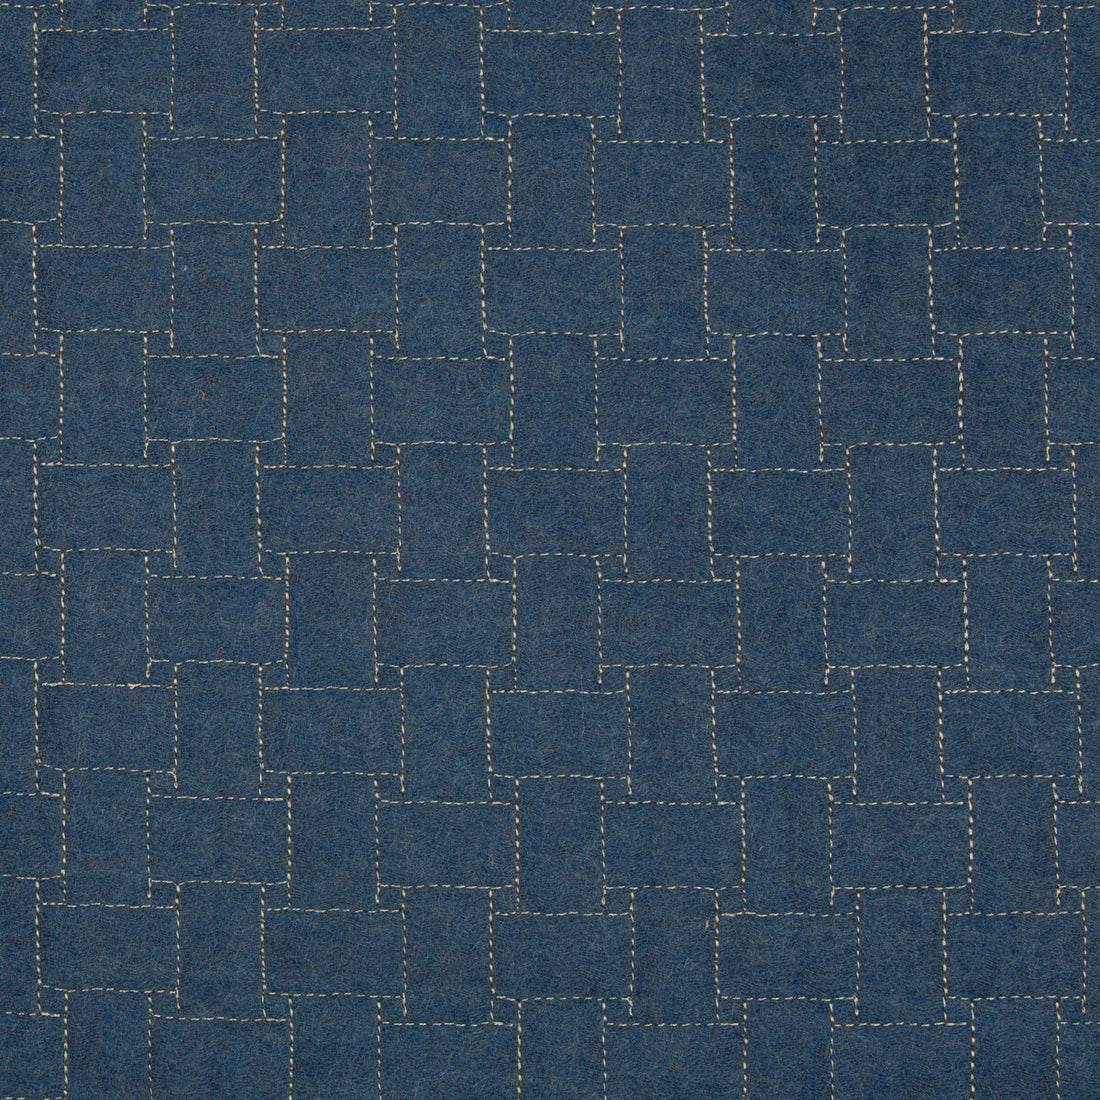 Epping Quilt fabric in blue color - pattern 2017140.5.0 - by Lee Jofa in the Lodge II Weaves And Embroideries collection